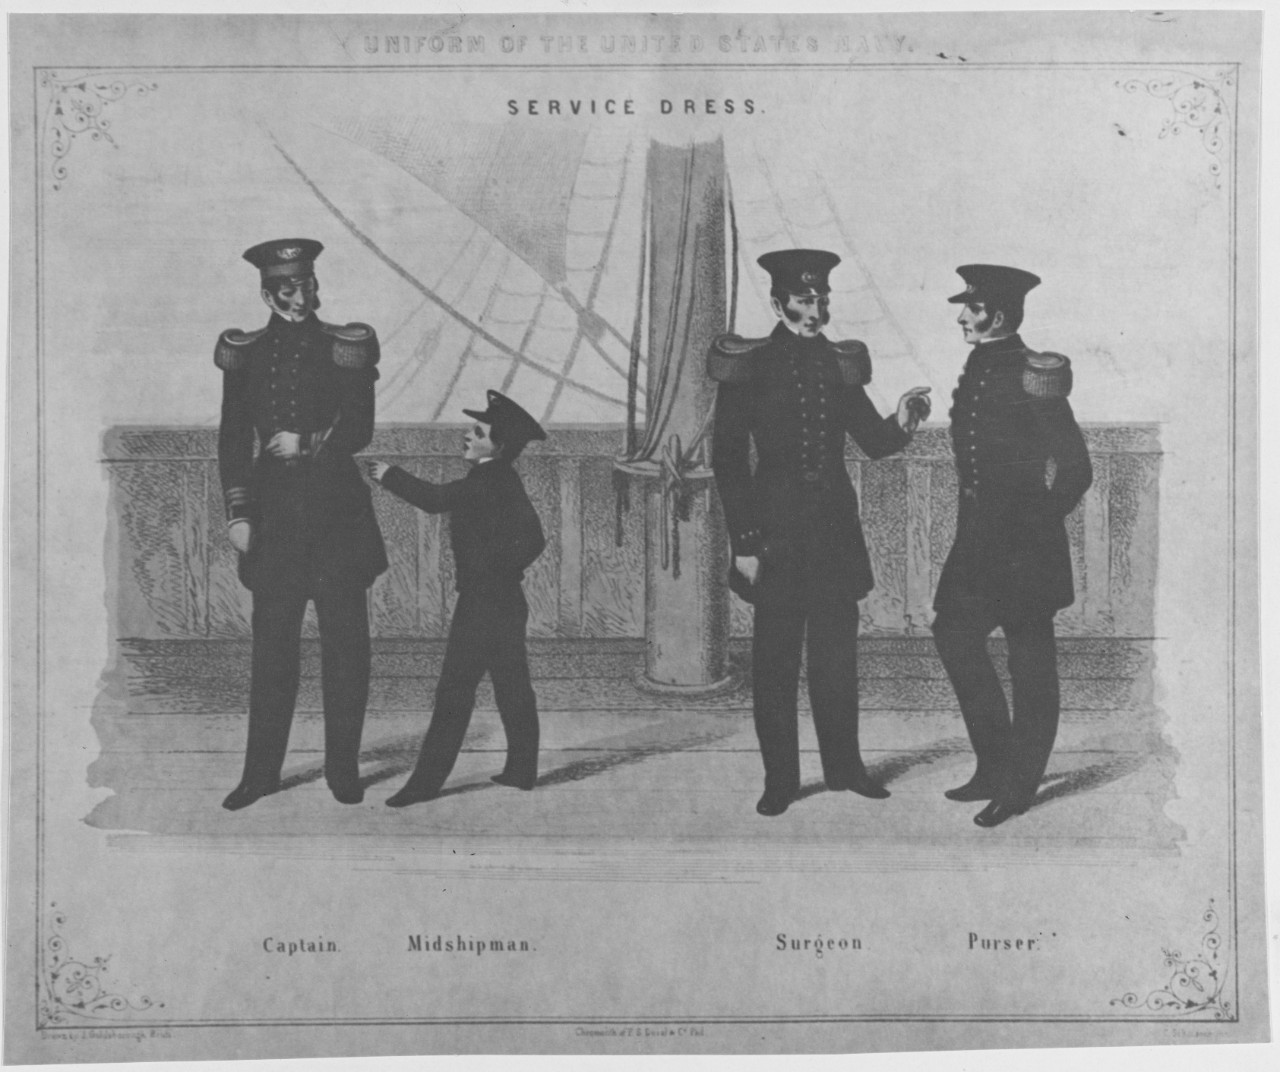 Uniforms of the United States Navy, 1852